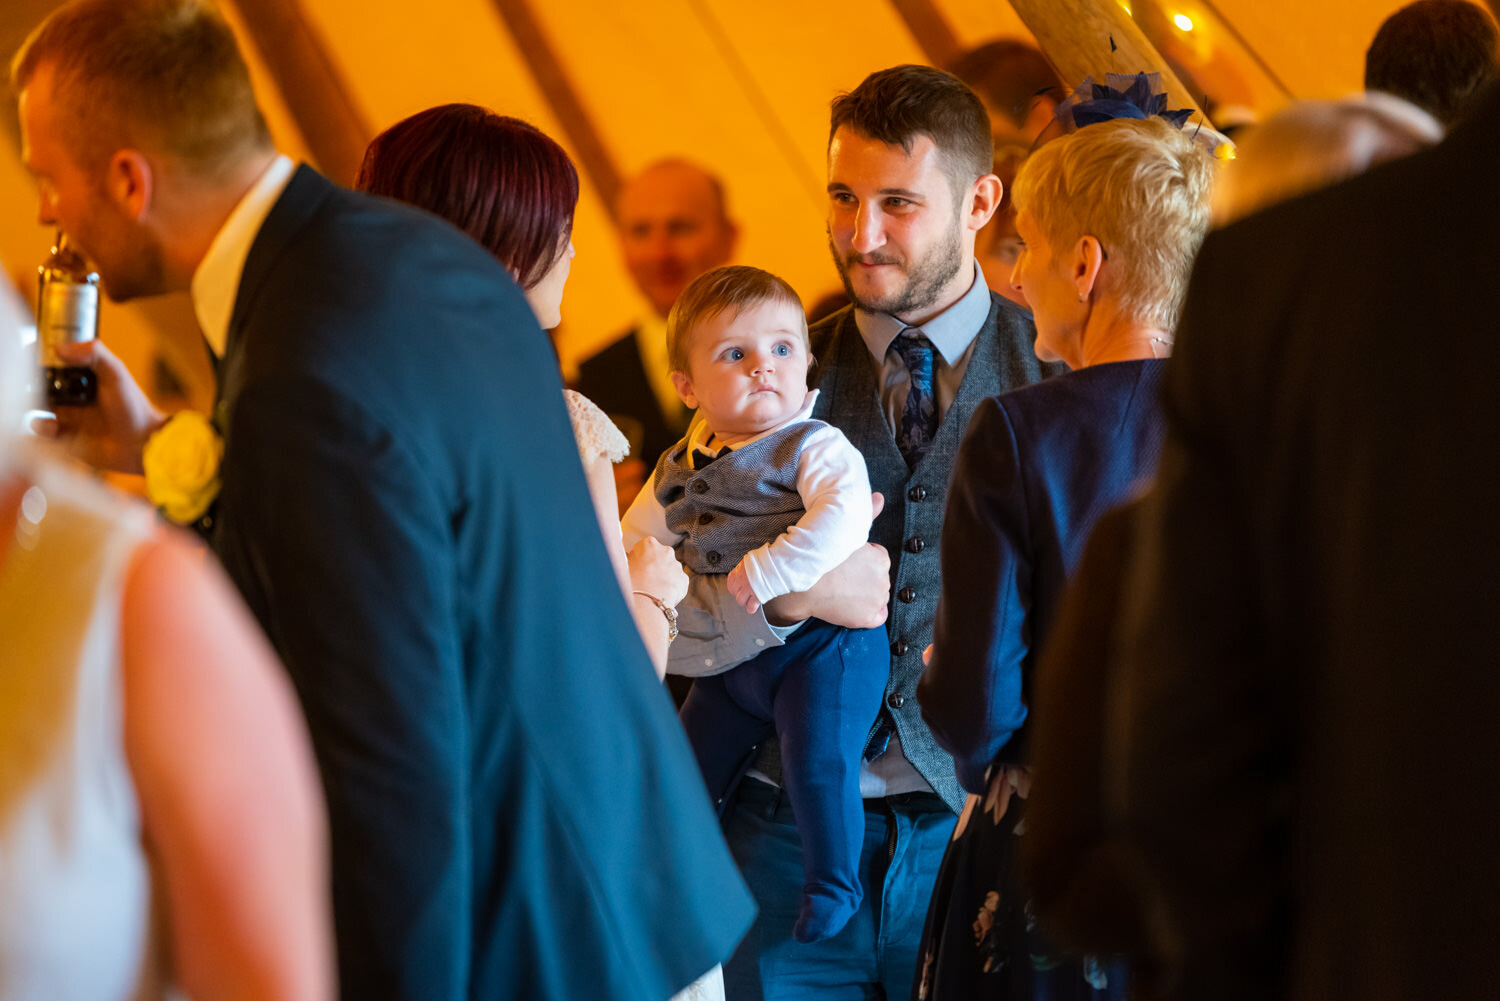 Baby looking at wedding guest with funny face